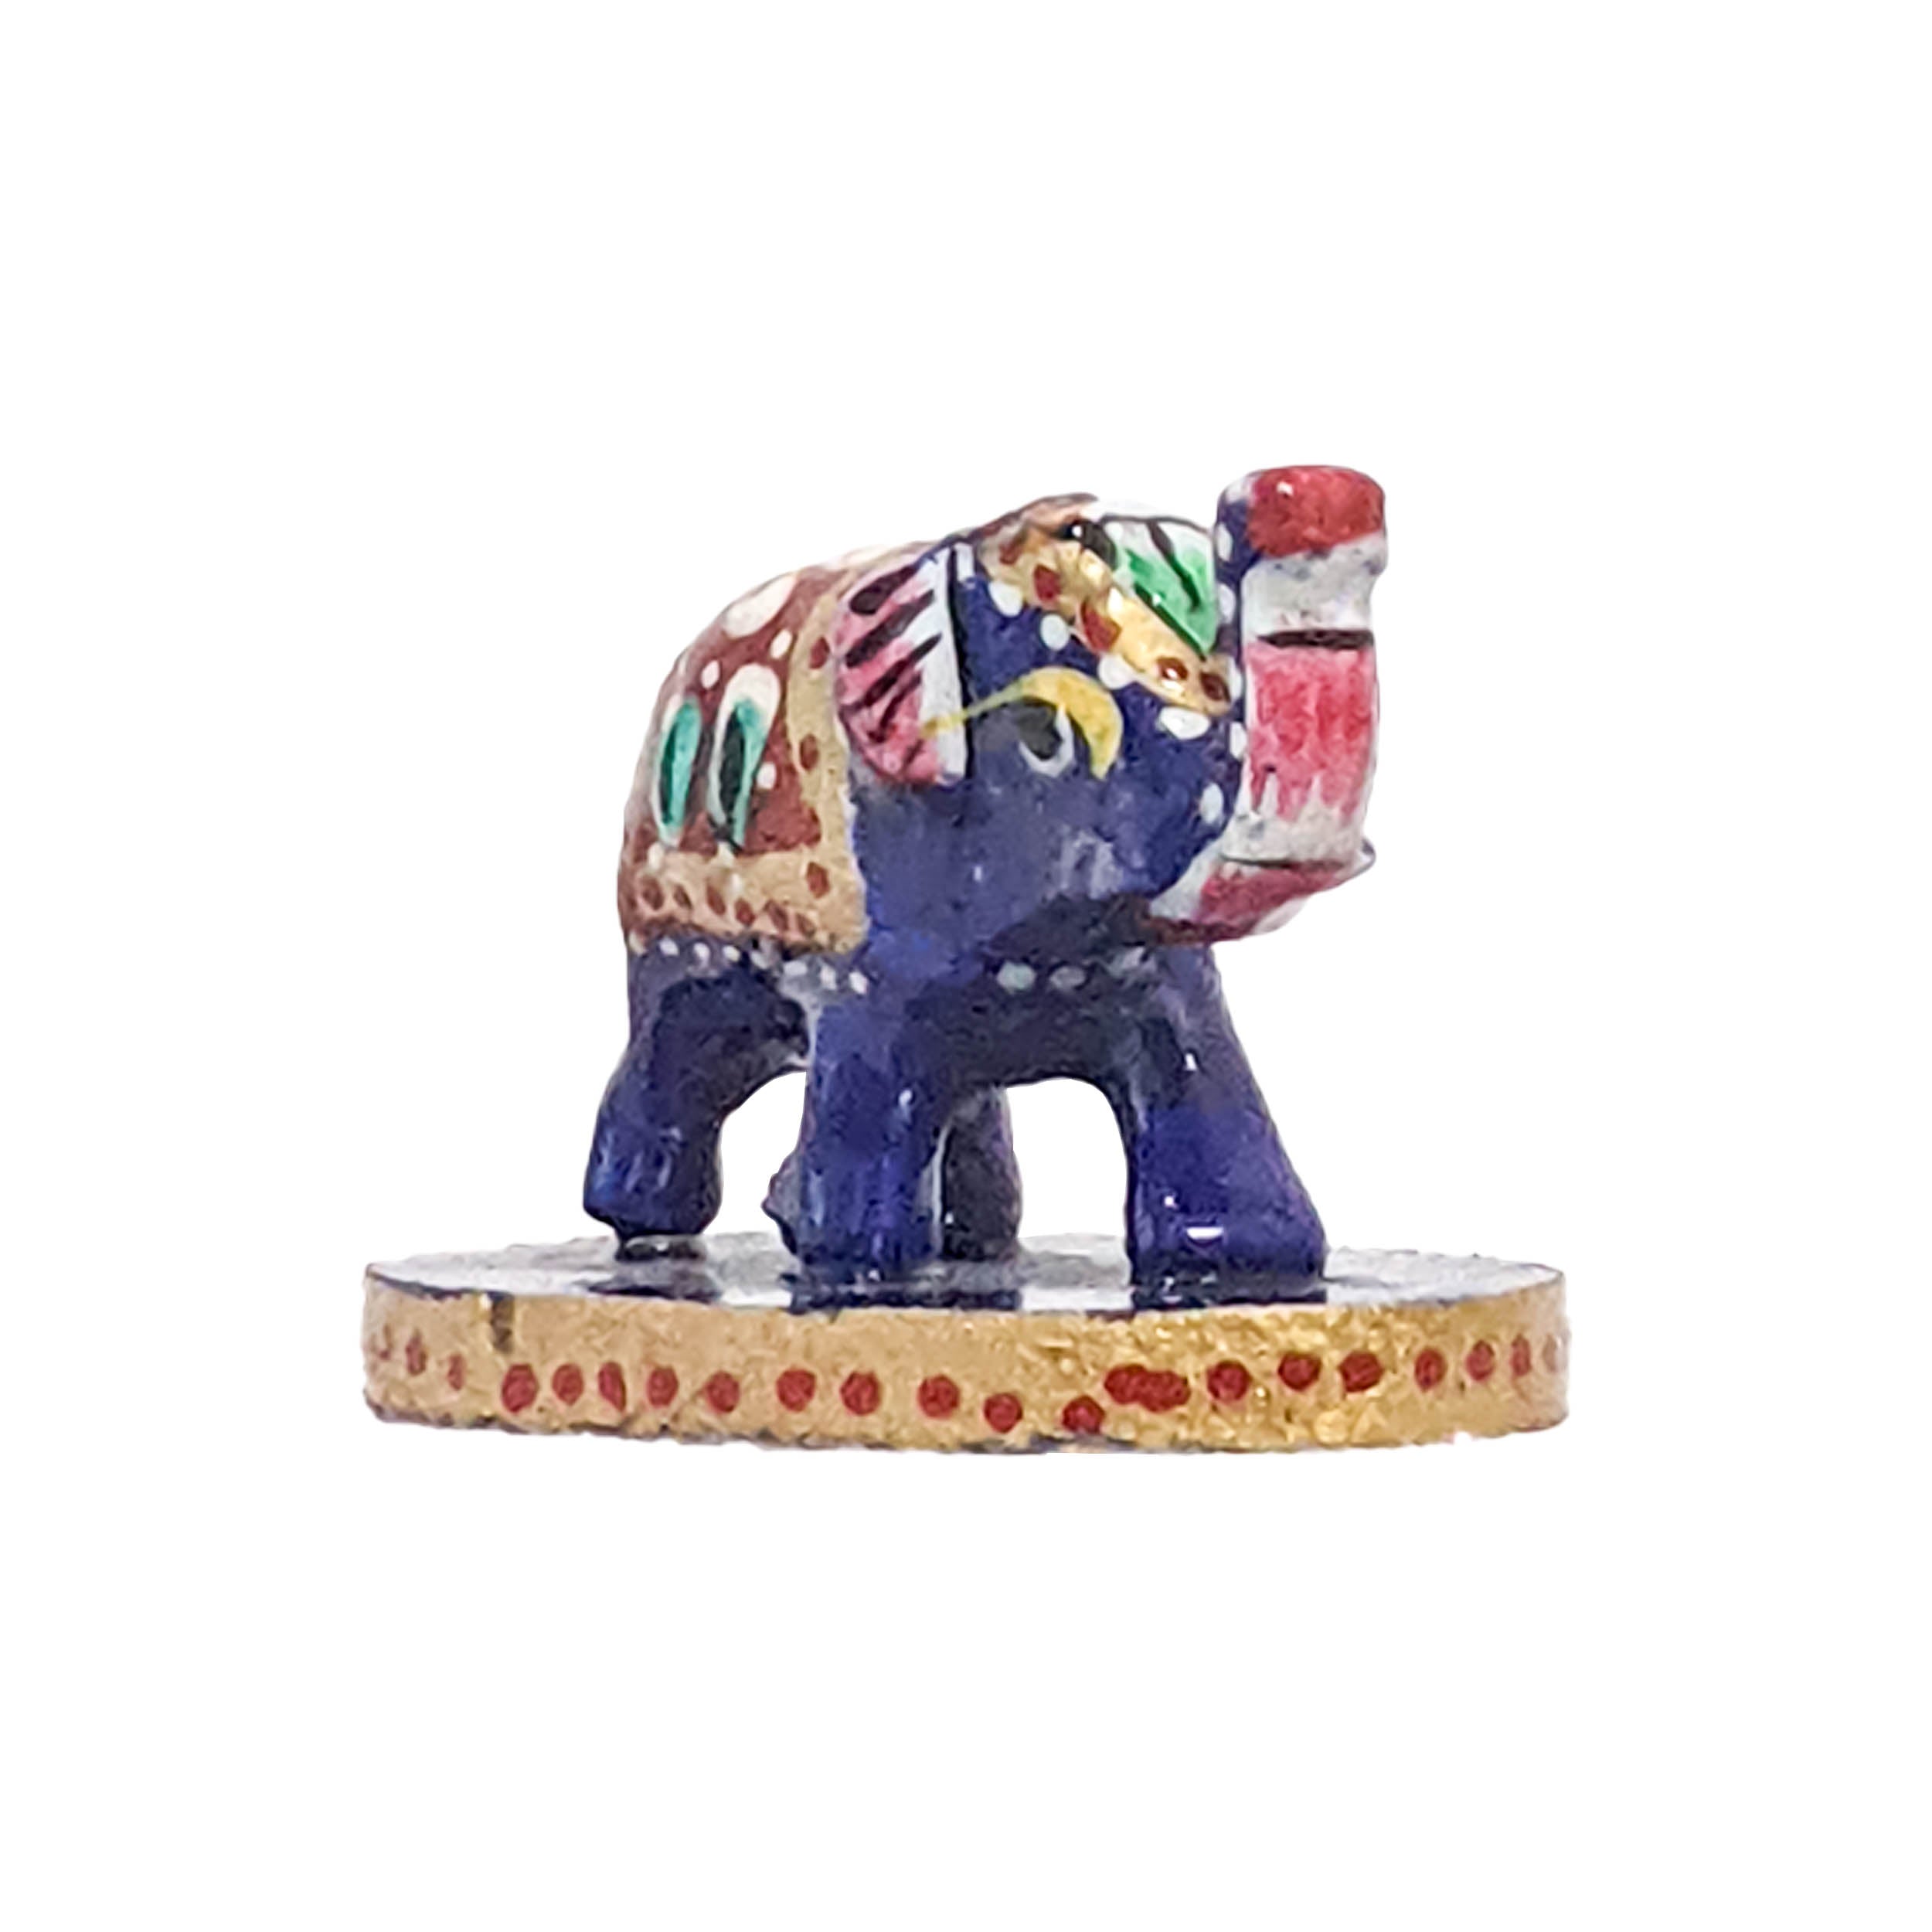 Bring the Magic of Handmade and Hand Painted Elephants into Your Home